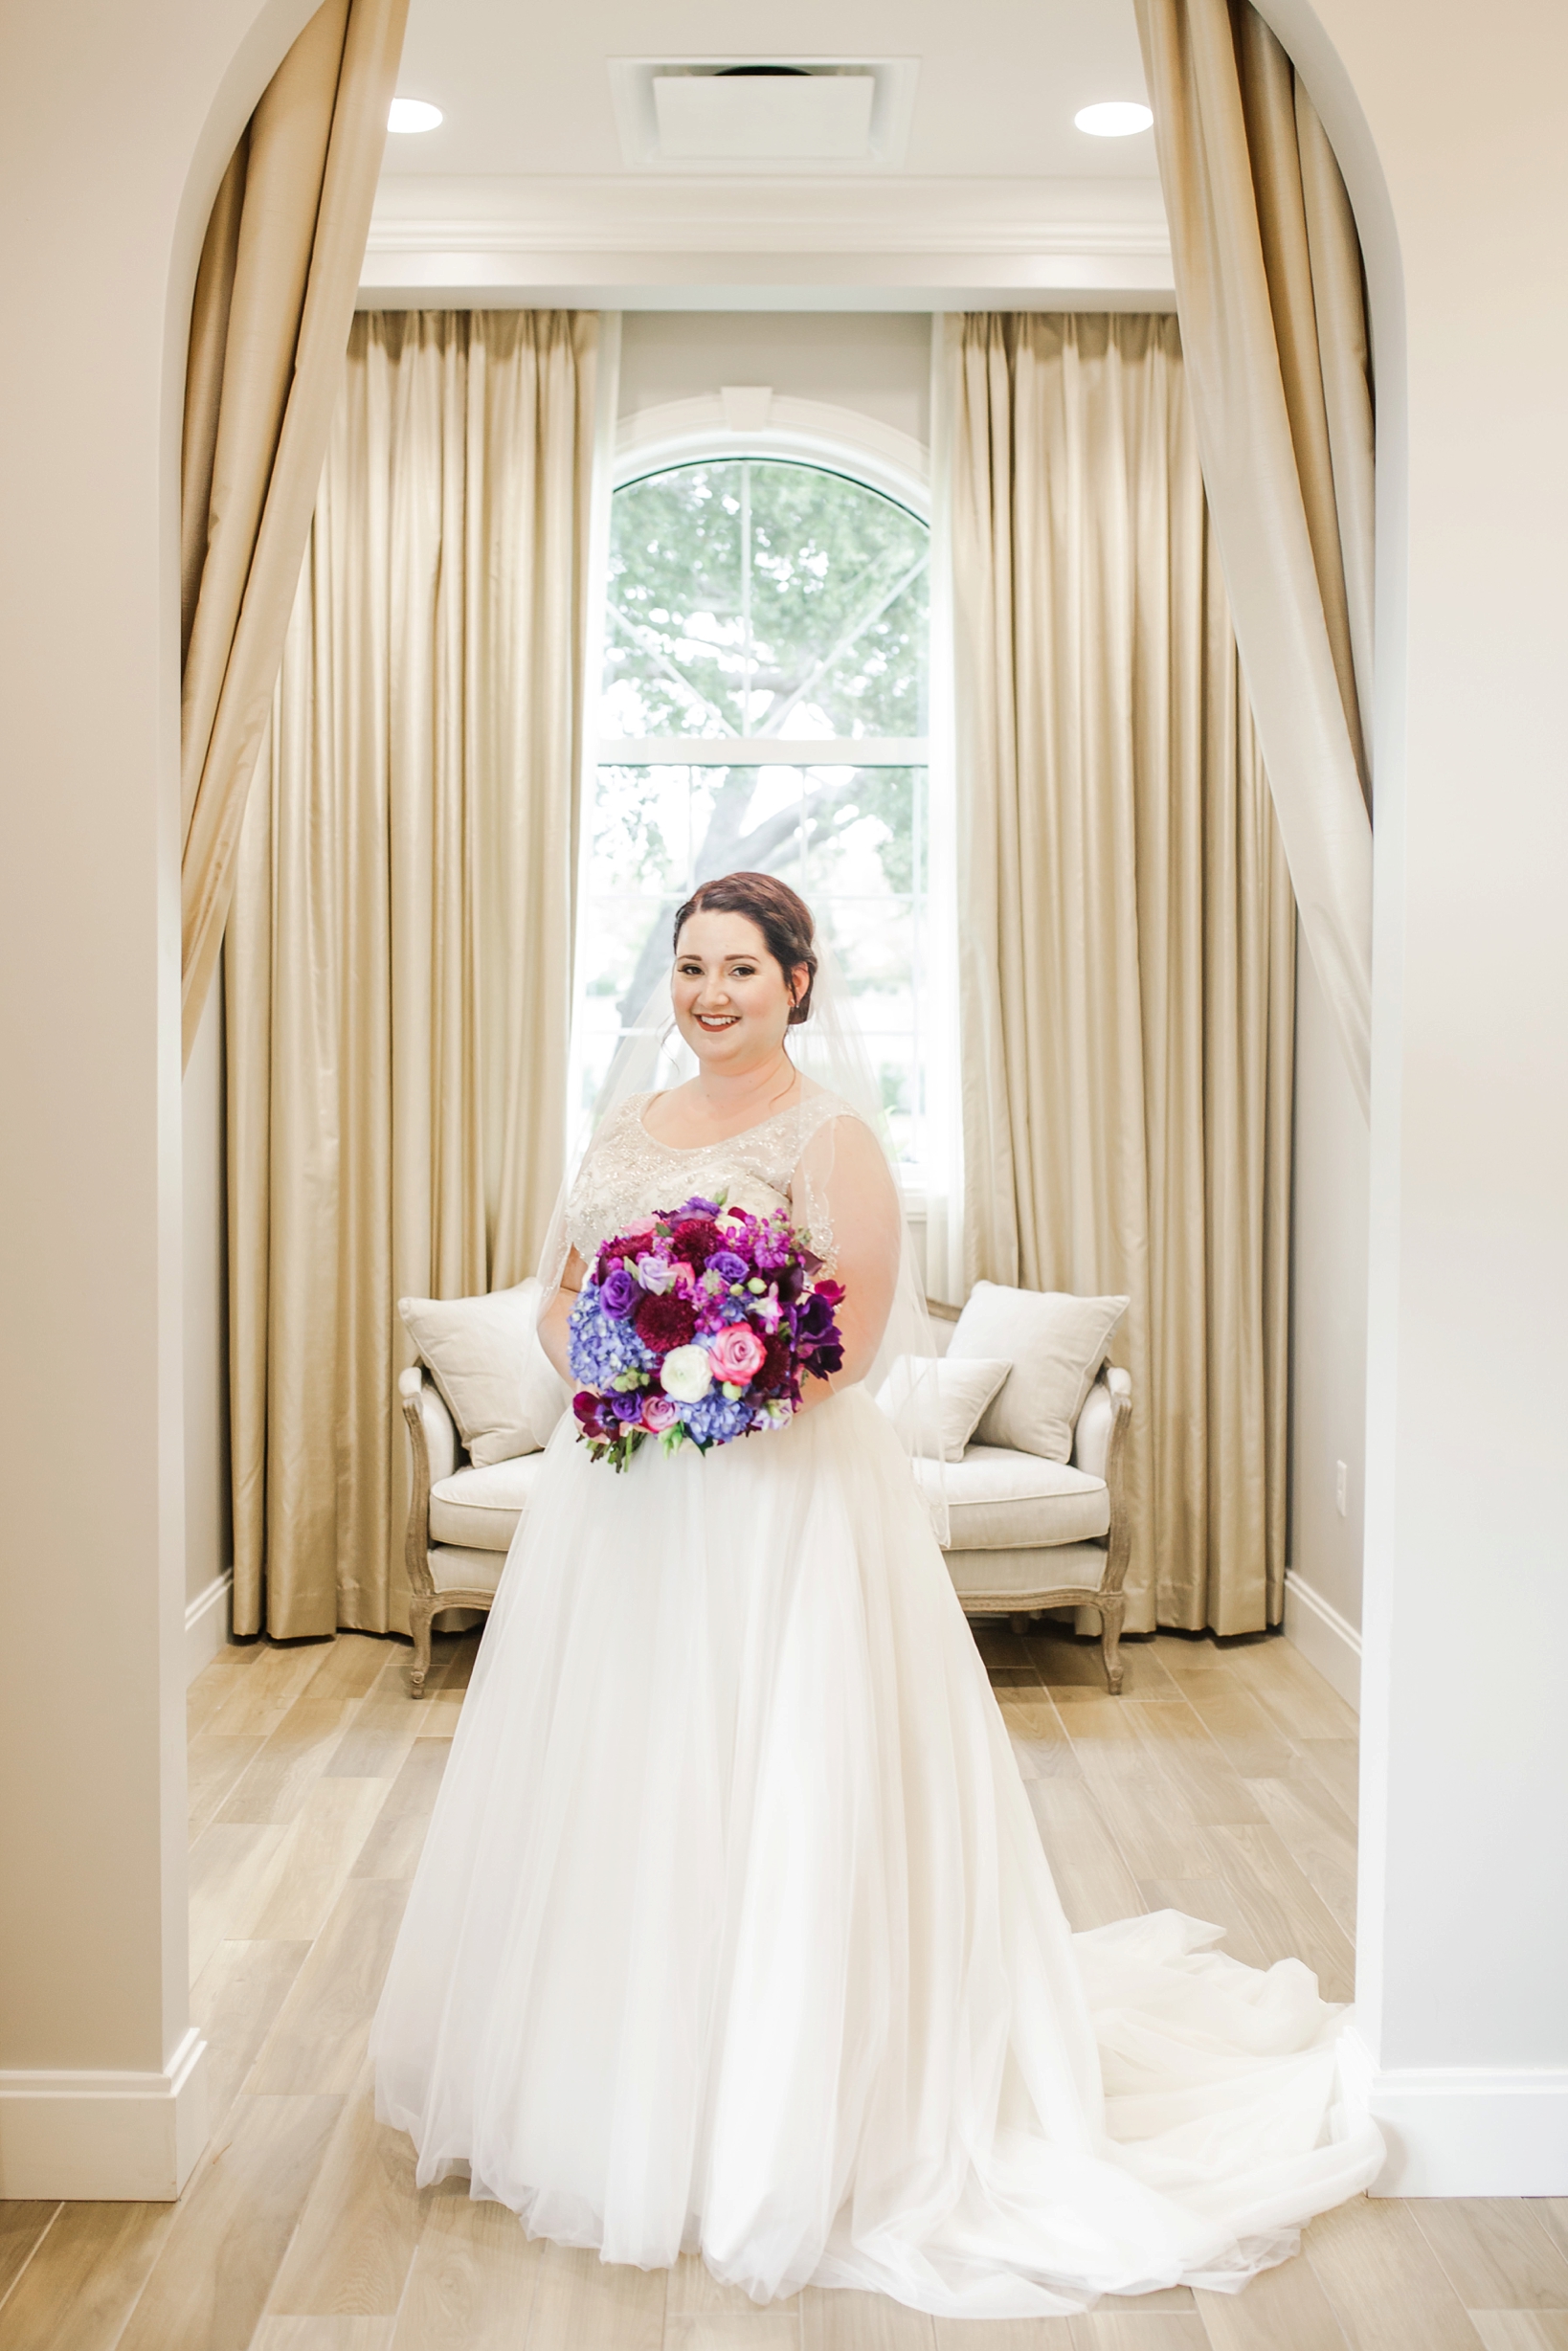 The bride holding her colorful bouquet in the bridal suite of the Harborside Chapel by Sarah & Ben Photography